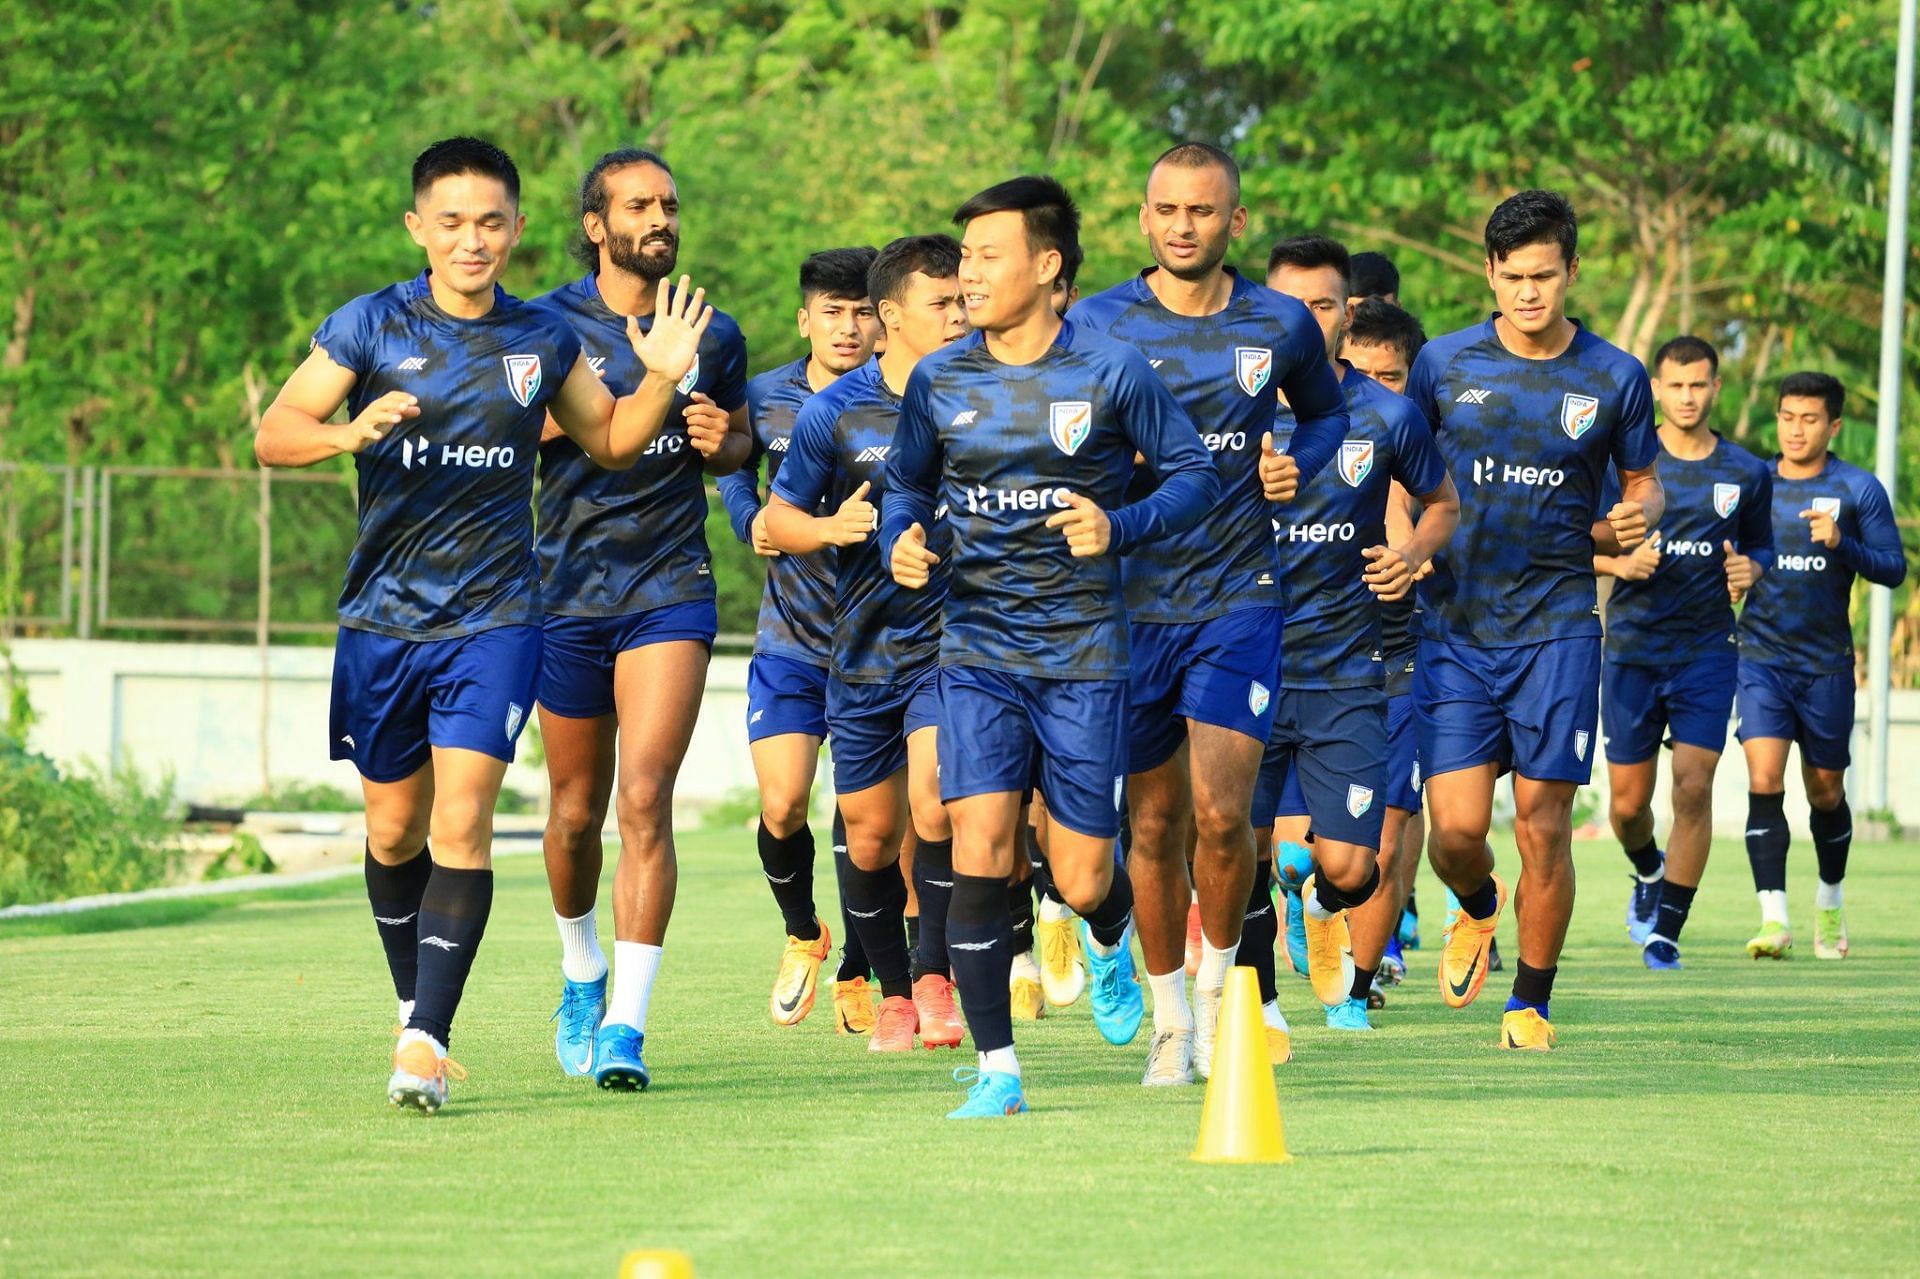 Indian football team preparing ahead of the match. (Image Courtesy: Twitter/IndianFootball)